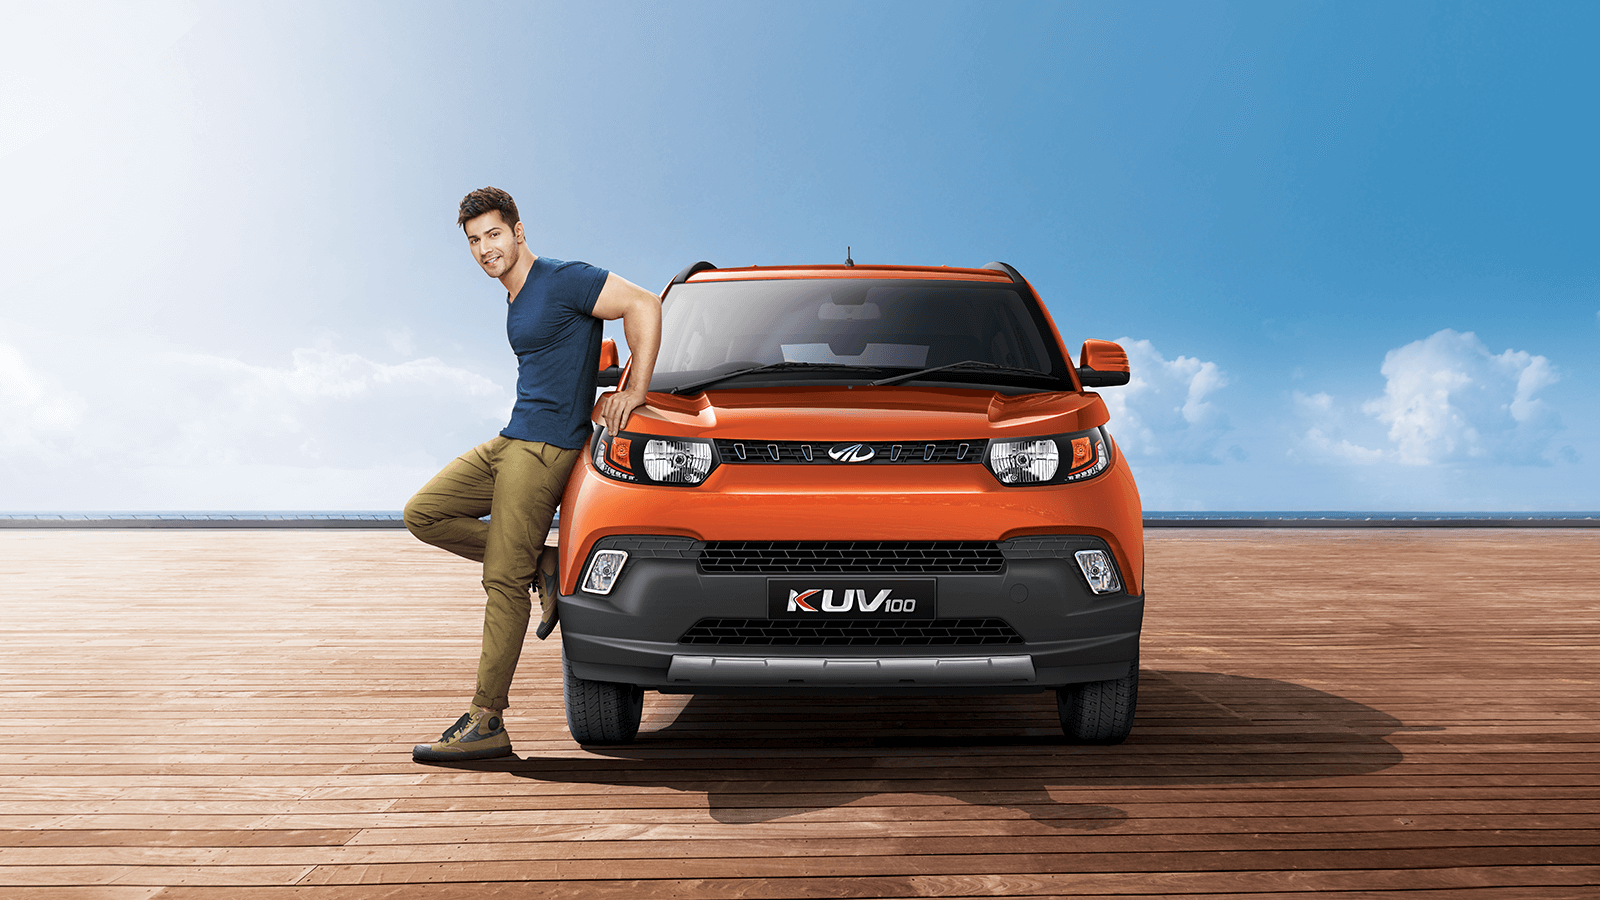 Mahindra Offers Tons of Benefits On Its SUV Styled Hatchback, KUV100